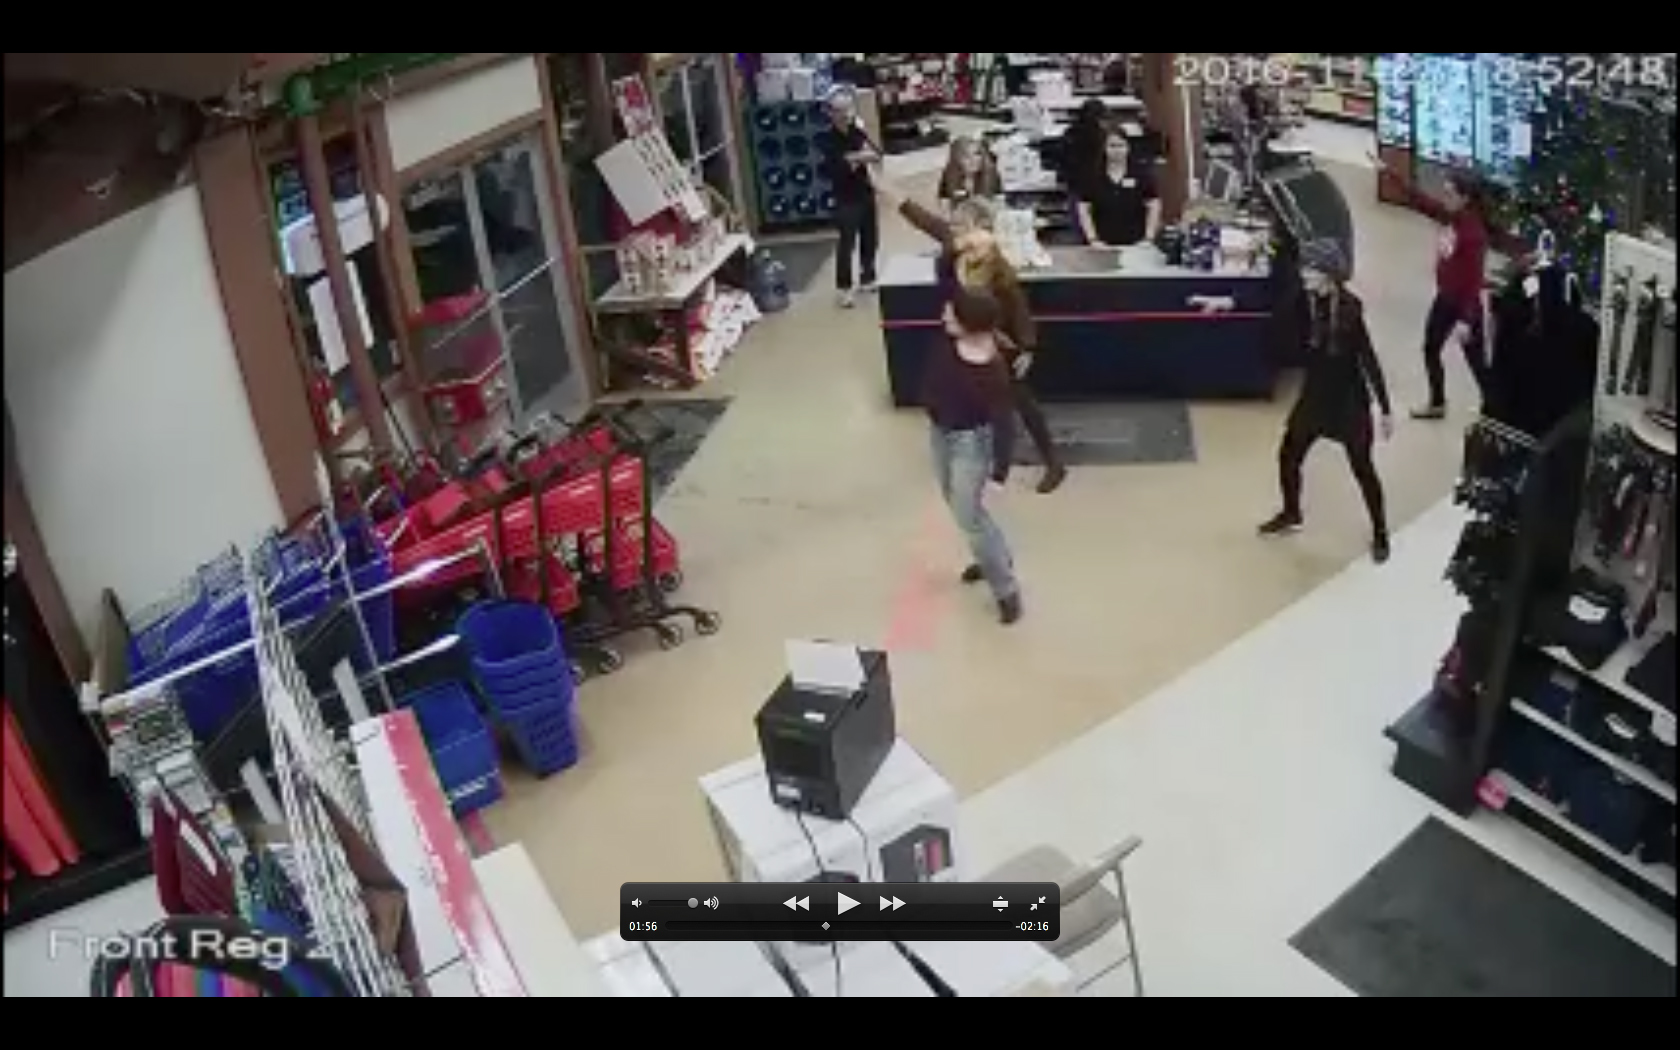 Dancers do a flash mob dance recorded by surveillance cameras at Ulmer’s.